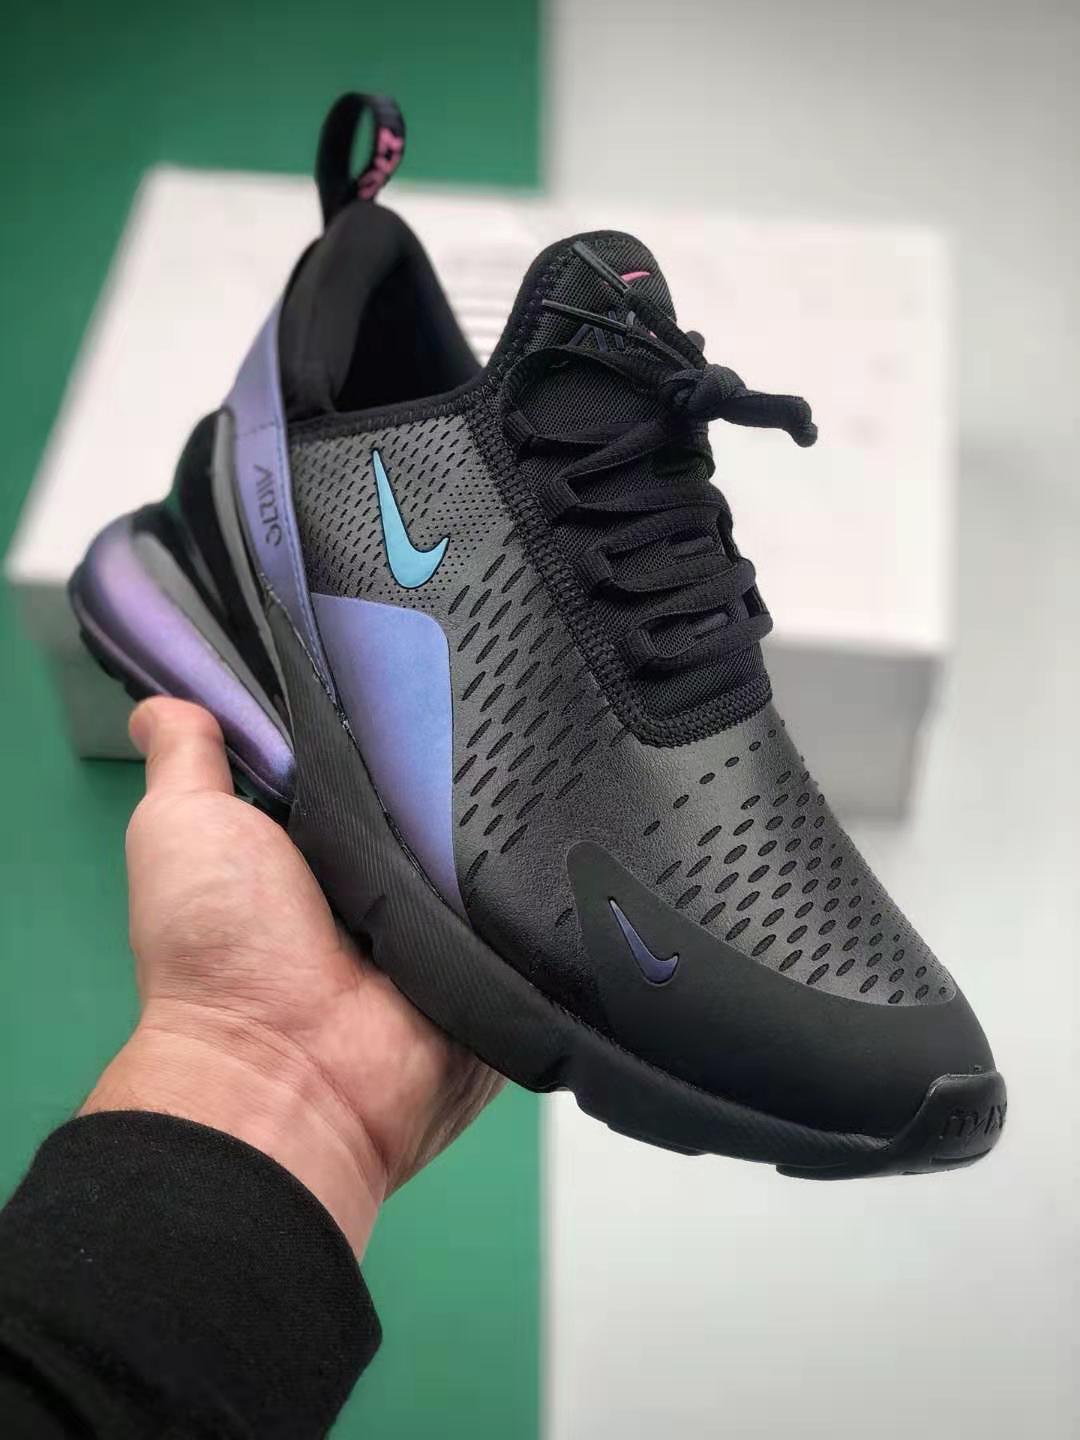 Nike Air Max 270 'Throwback Future' AH8050-020 - Futuristic Style and Supreme Comfort for True Sneakerheads